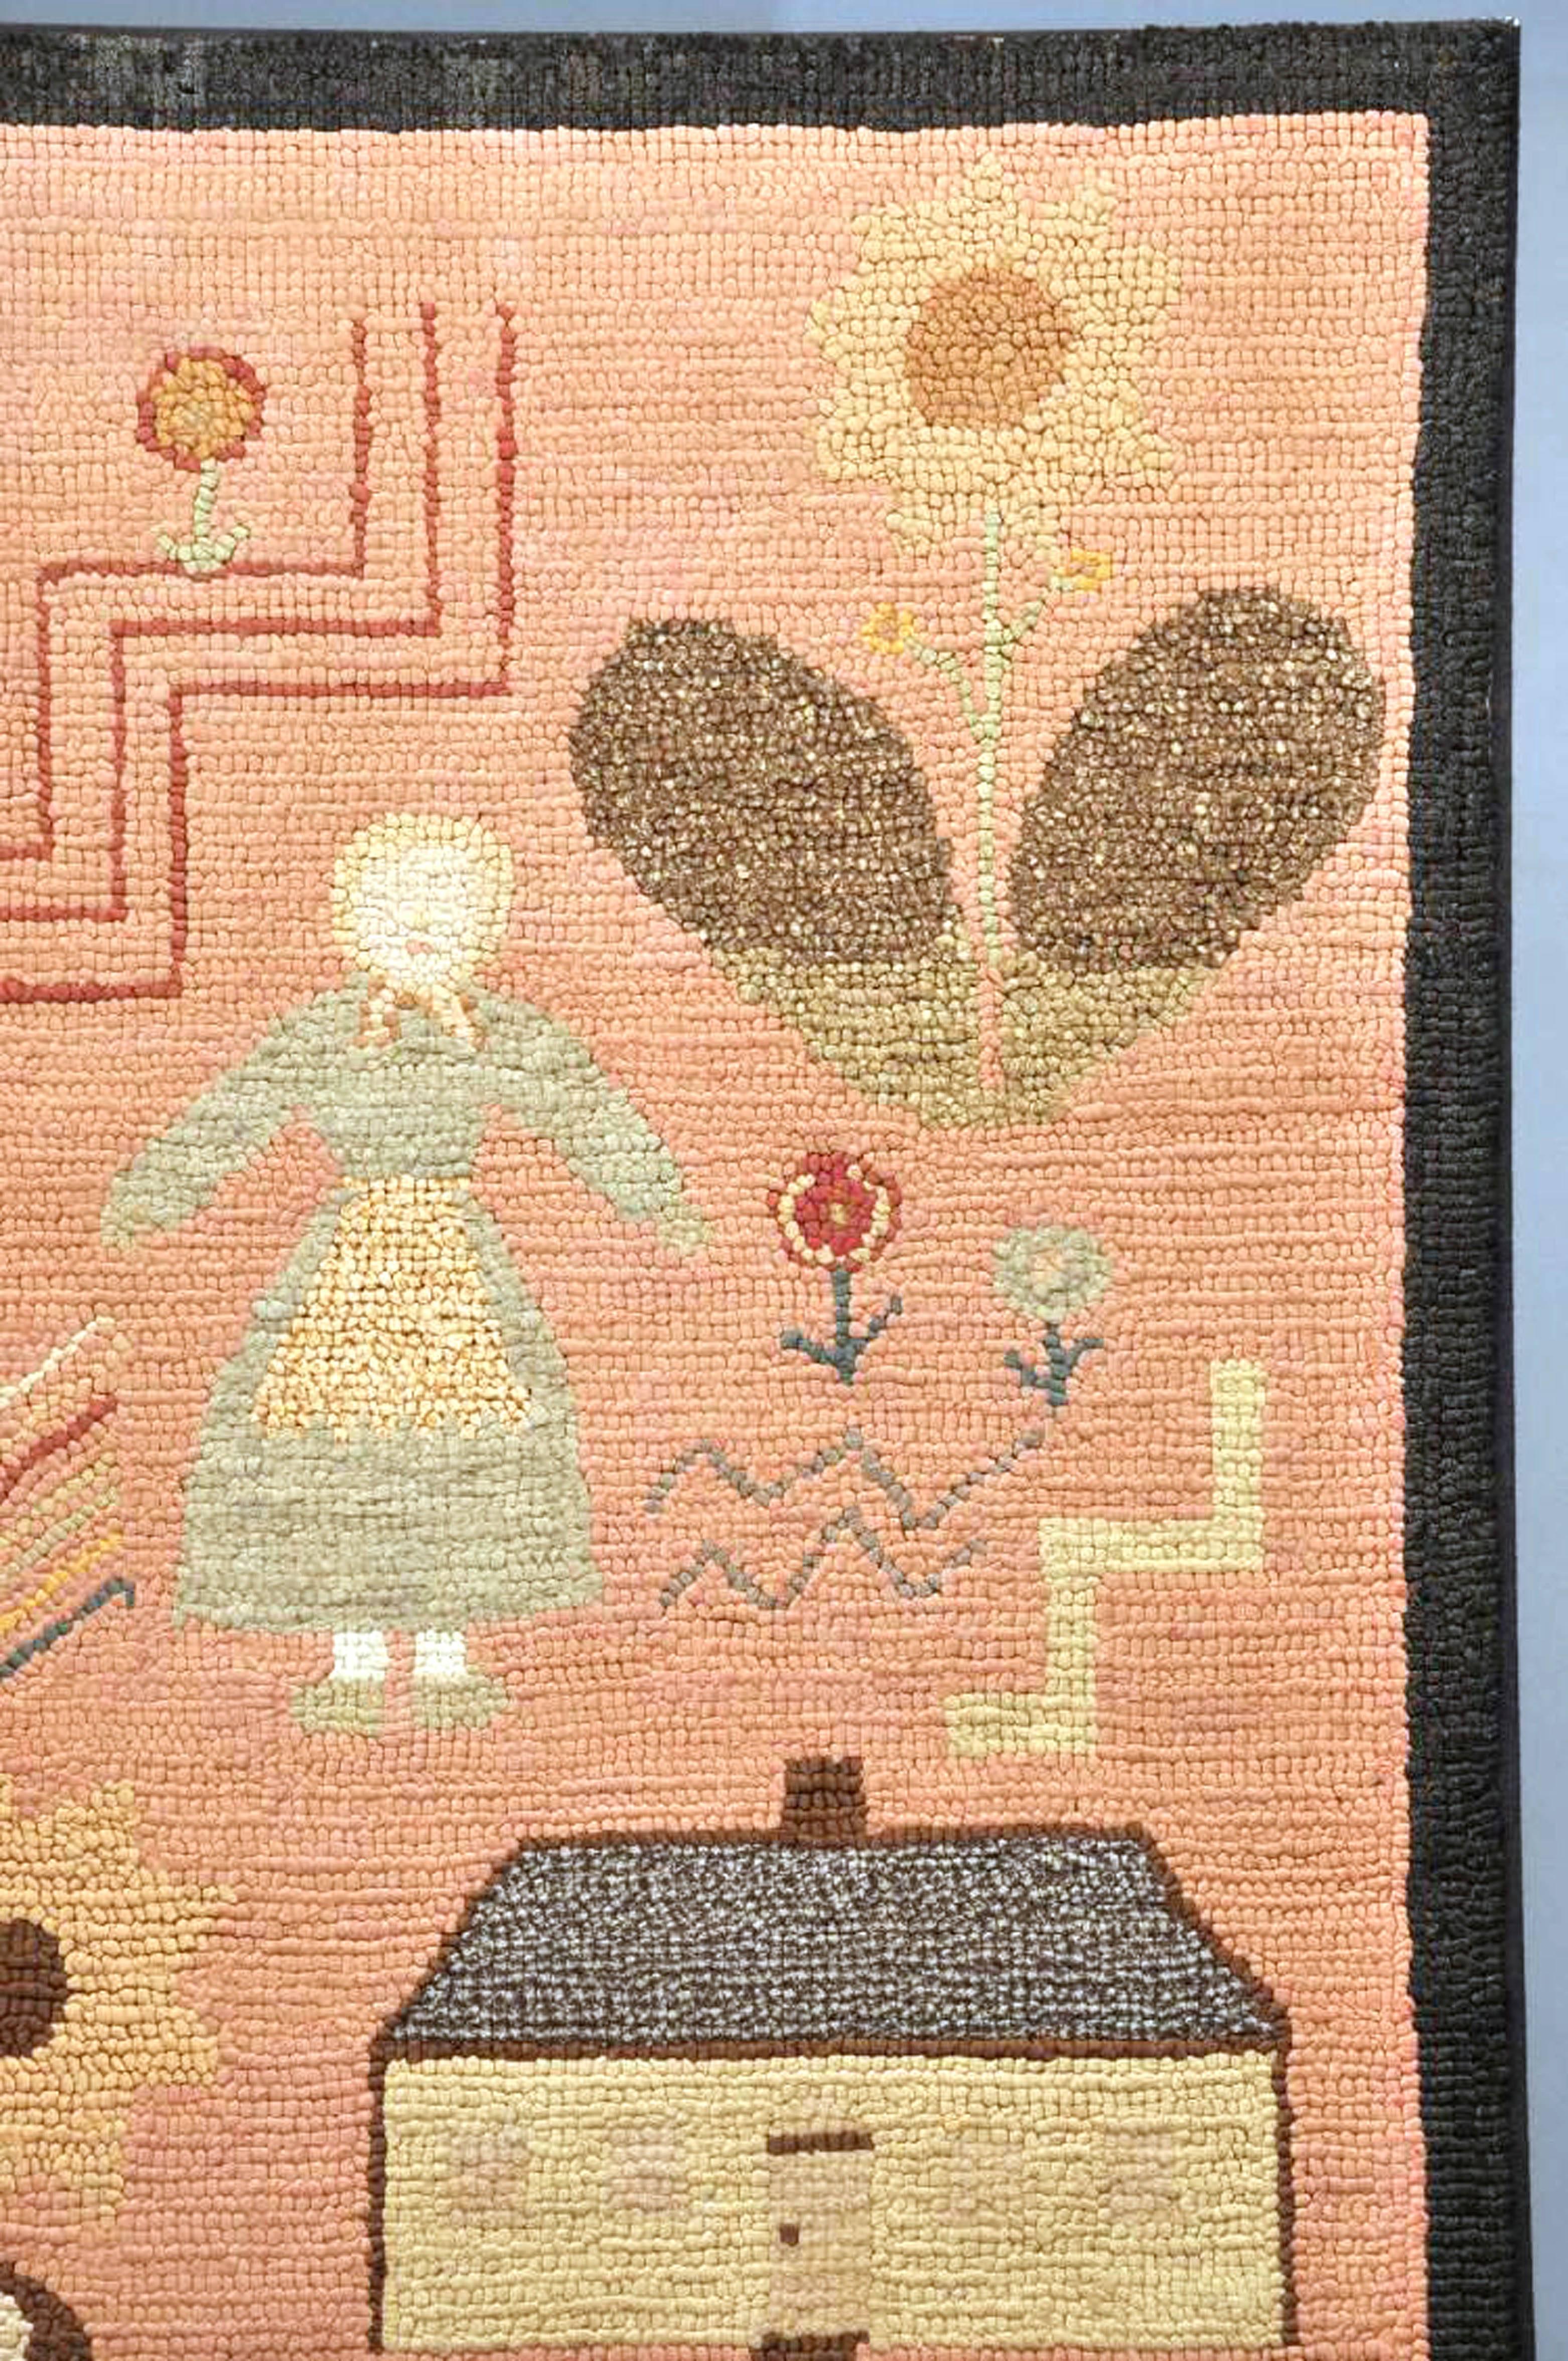 American Folk Art Pictorial Hooked Rug, Mounted on Stretcher, Late 19th Century 2